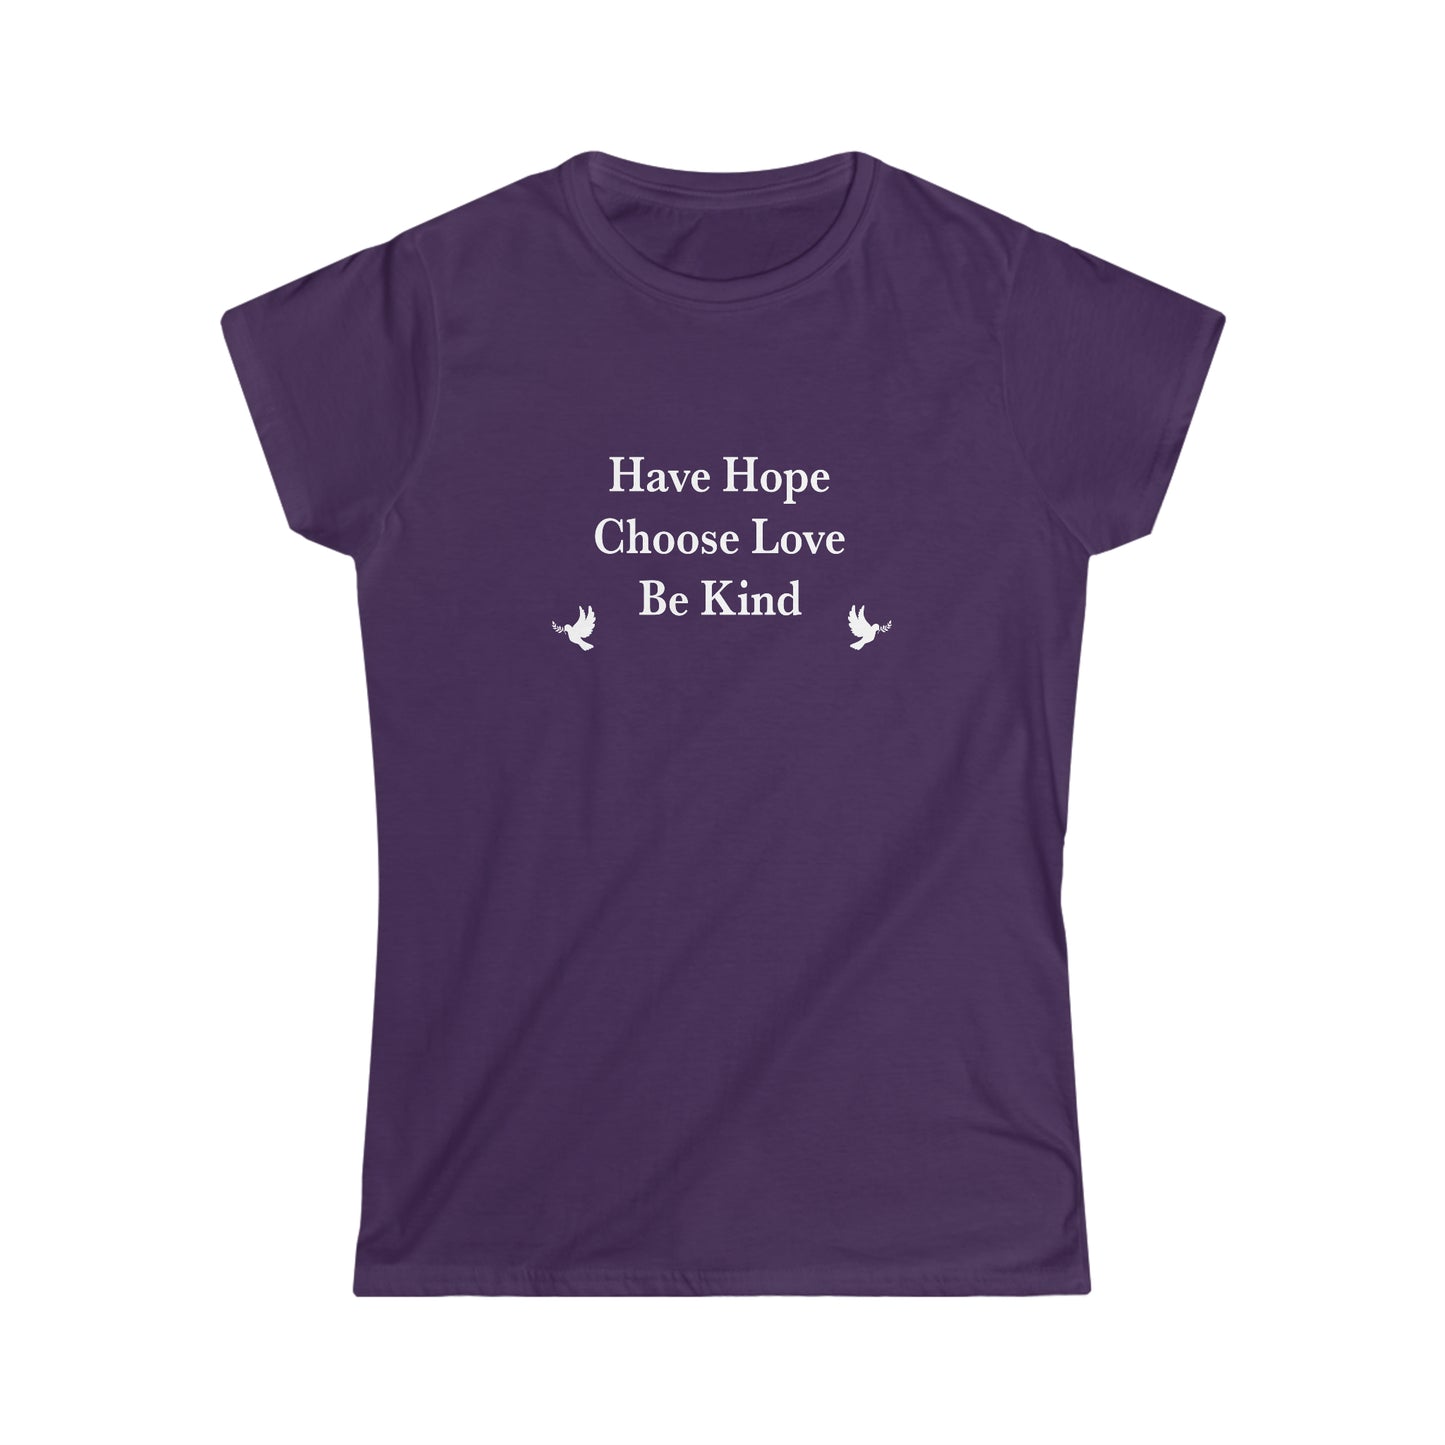 “Have Hope ~ Choose Love ~ Be Kind” Women’s T-Shirts